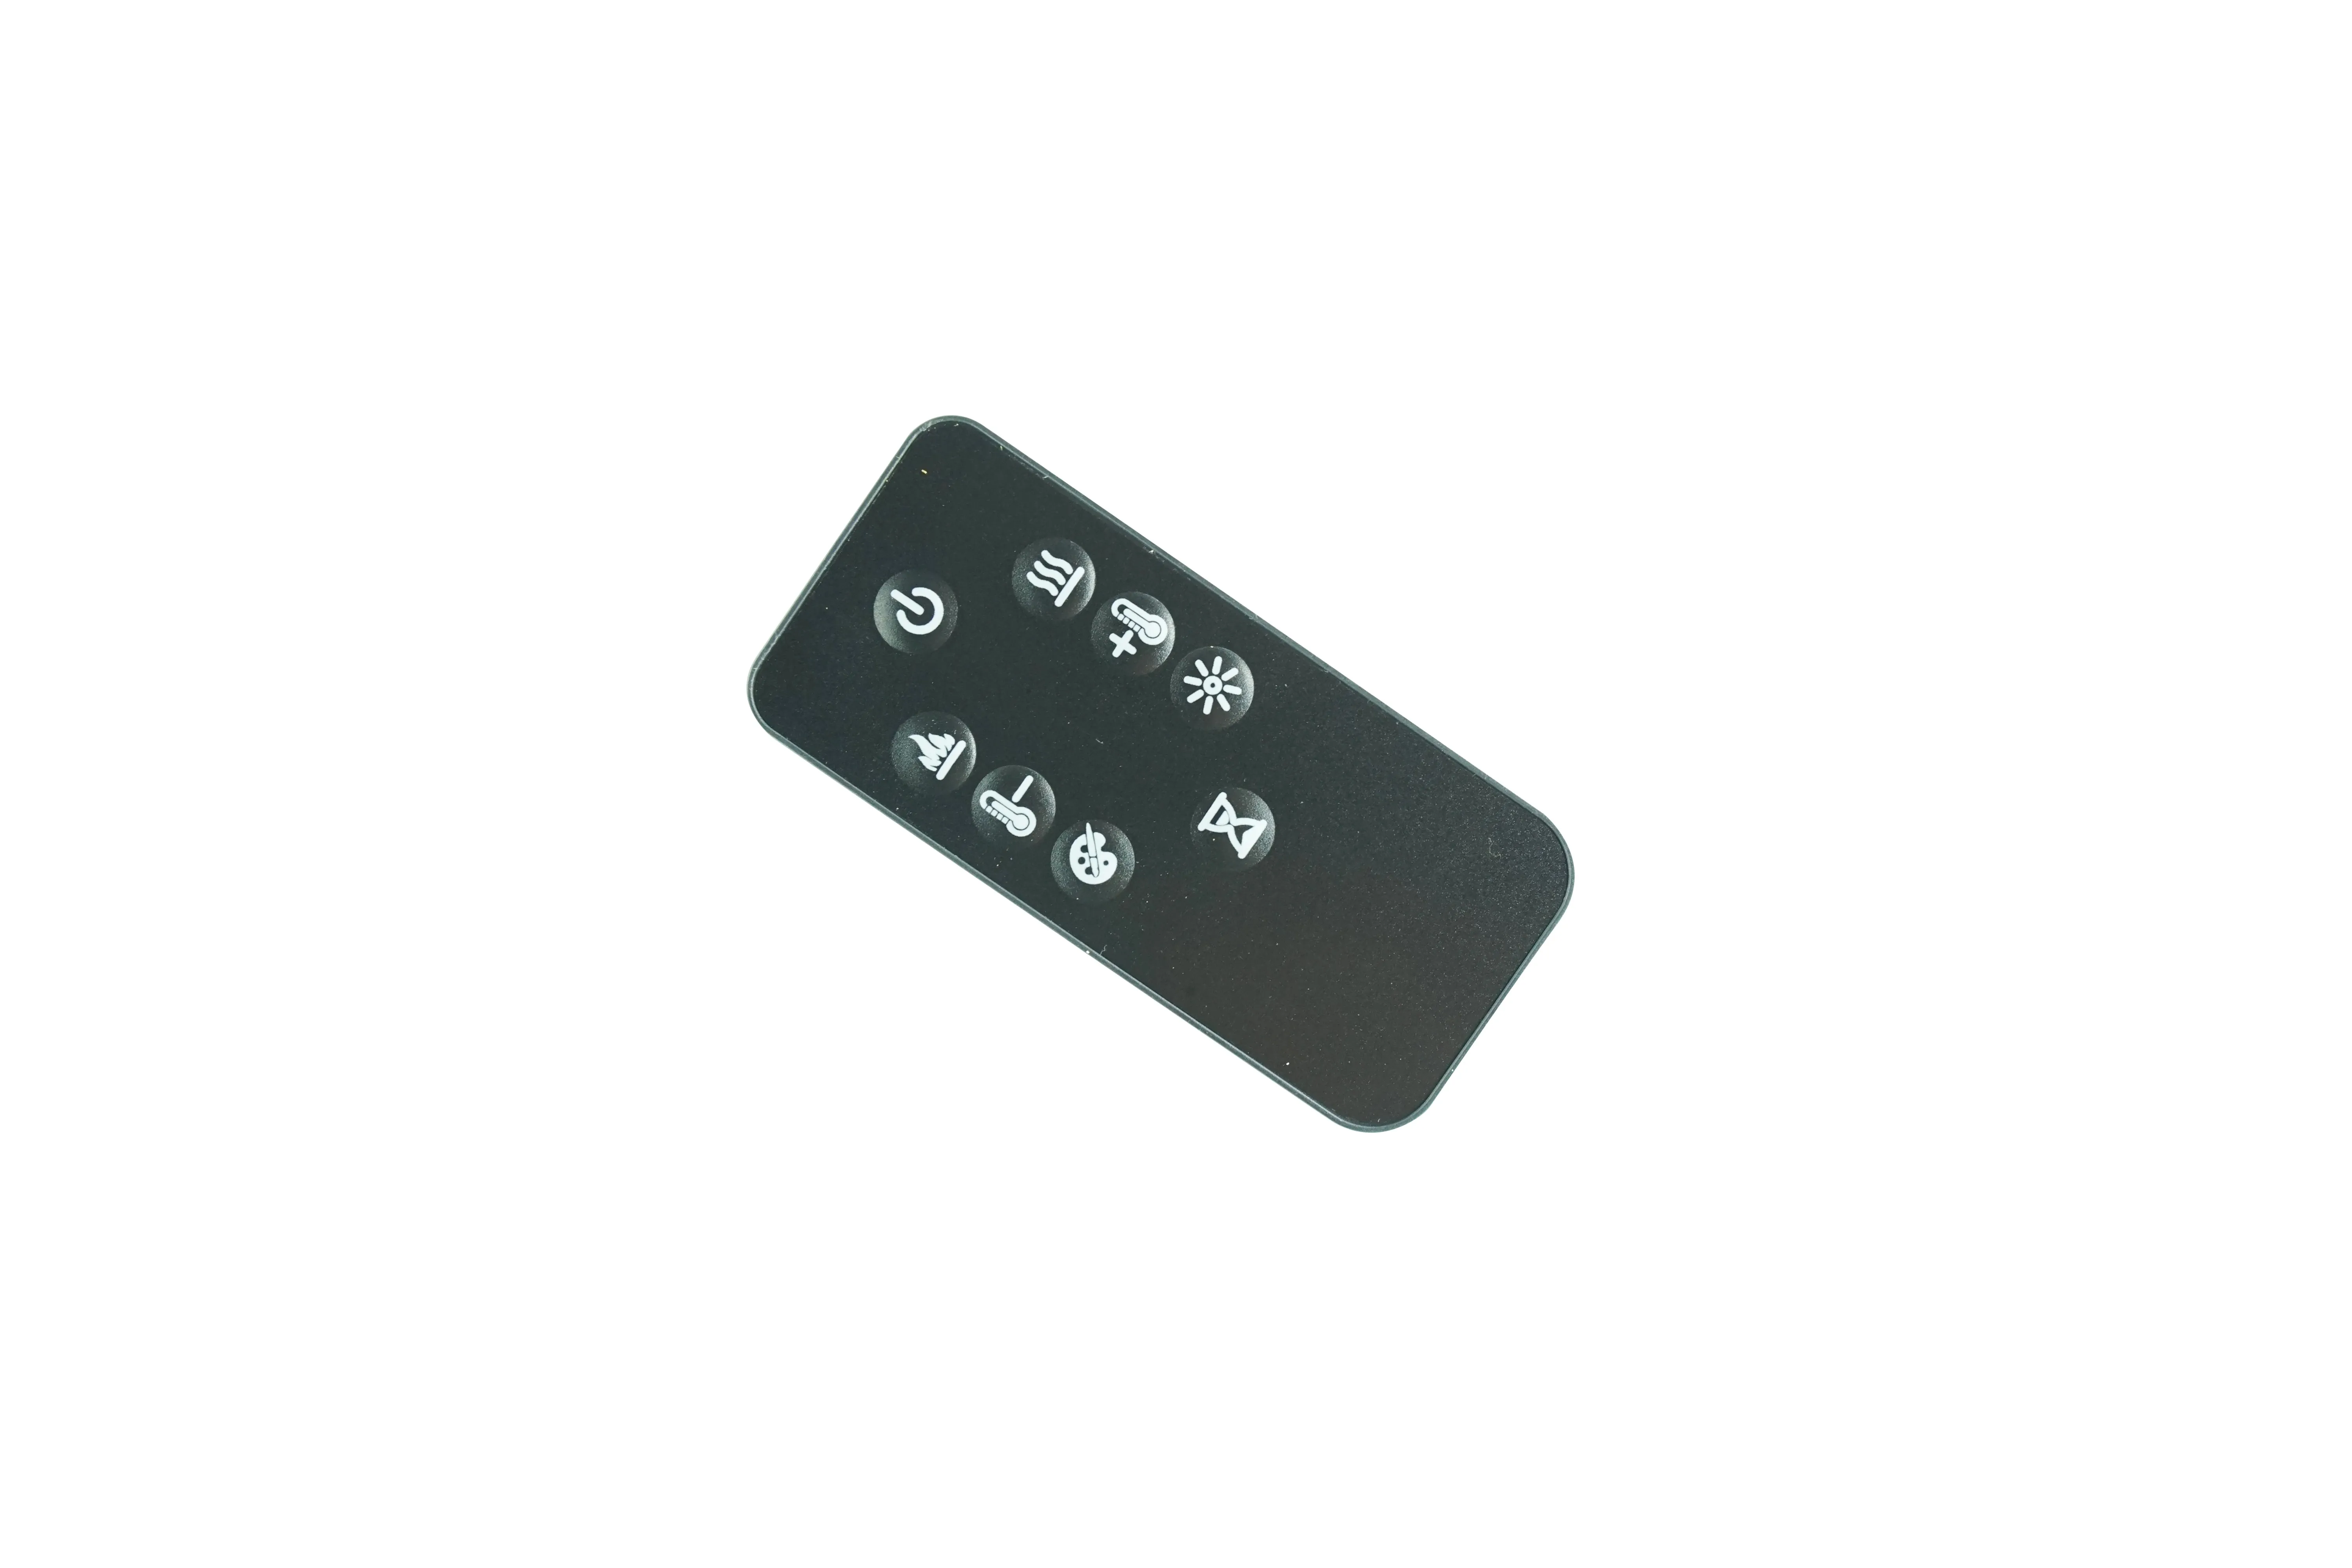 Remote Control For Dimplex 6700520200RP DFR2651L DFR2551L 6908932359 6908932459 DFR2551G 3D Wall Mount Electric Firebox Fireplace Heater